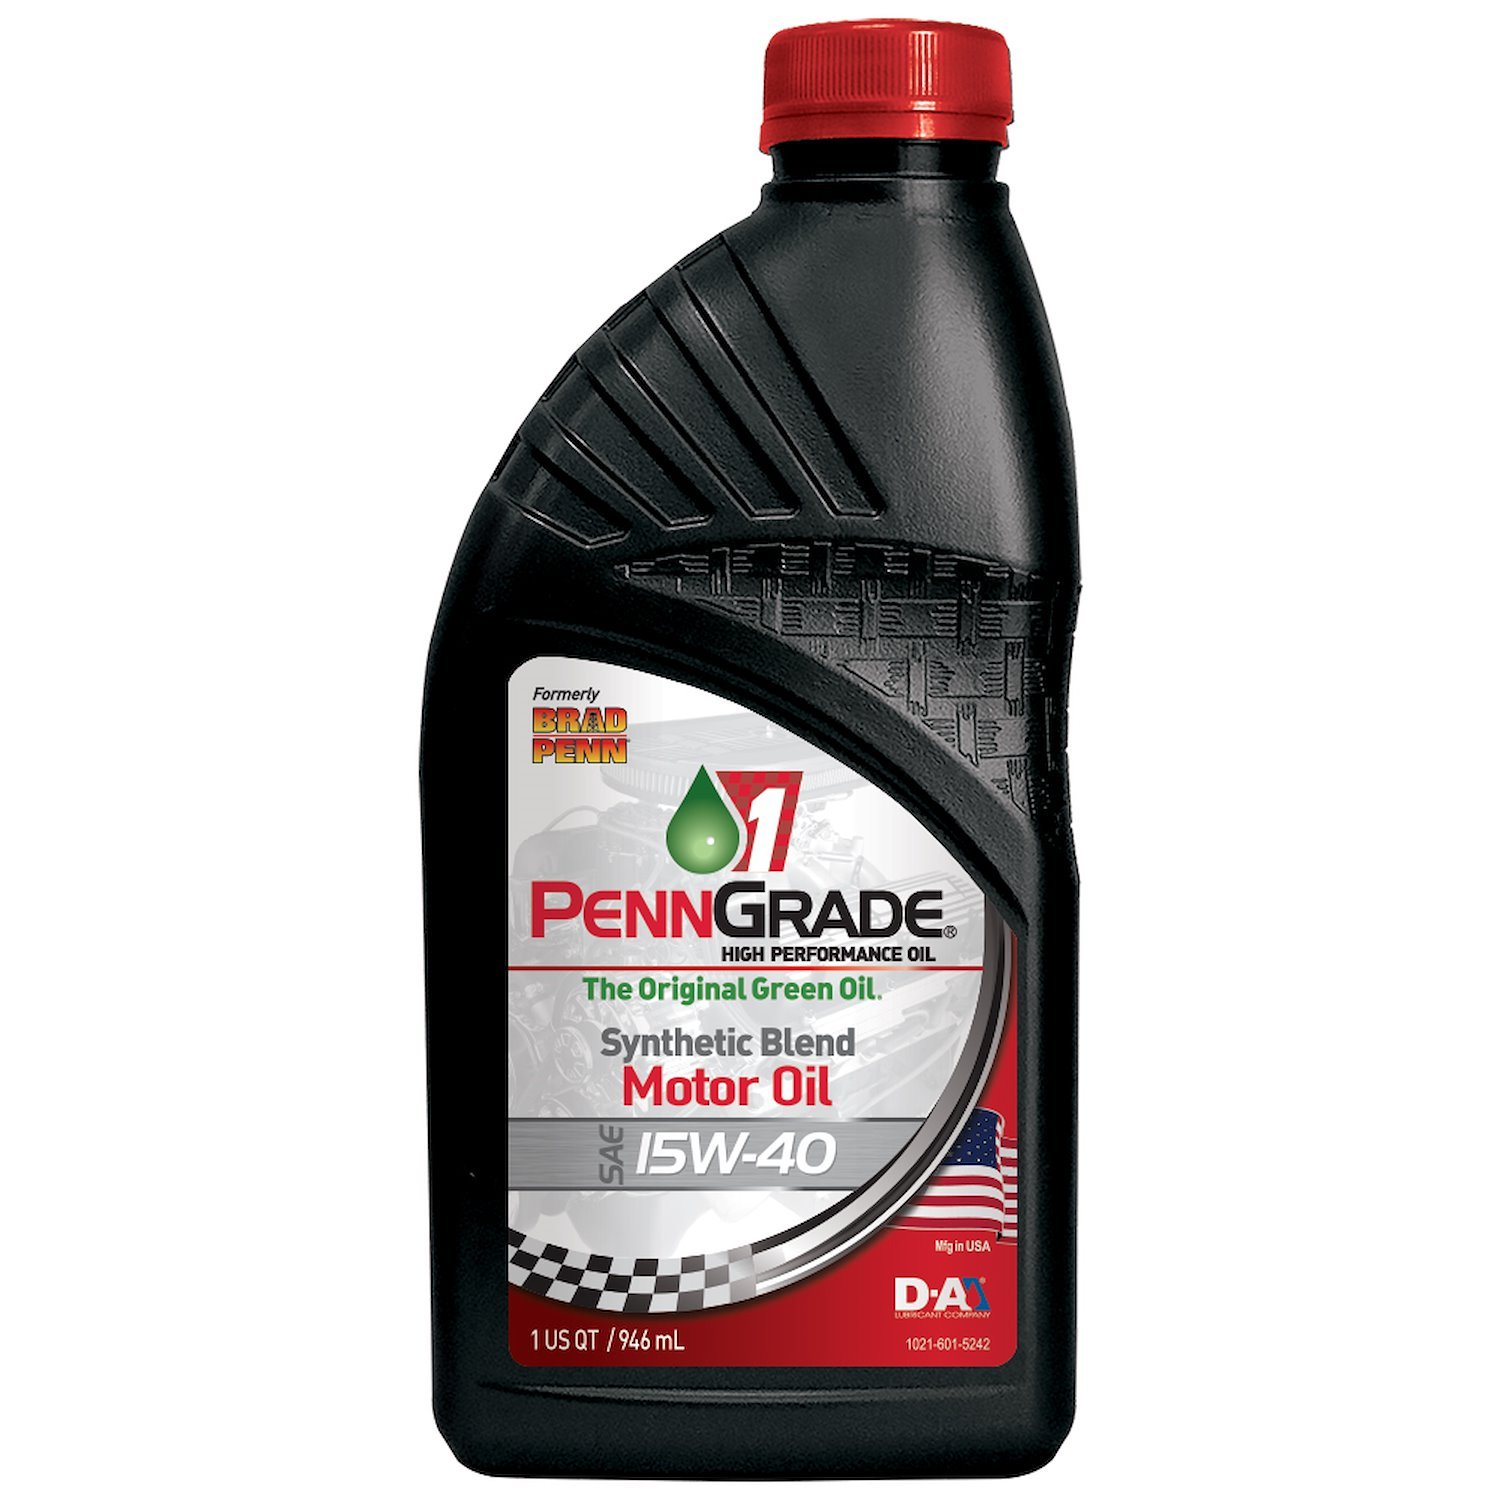 Penn-Grade 1 Partial Synthetic Motor Oil SAE 15W-40 - 12 Qts